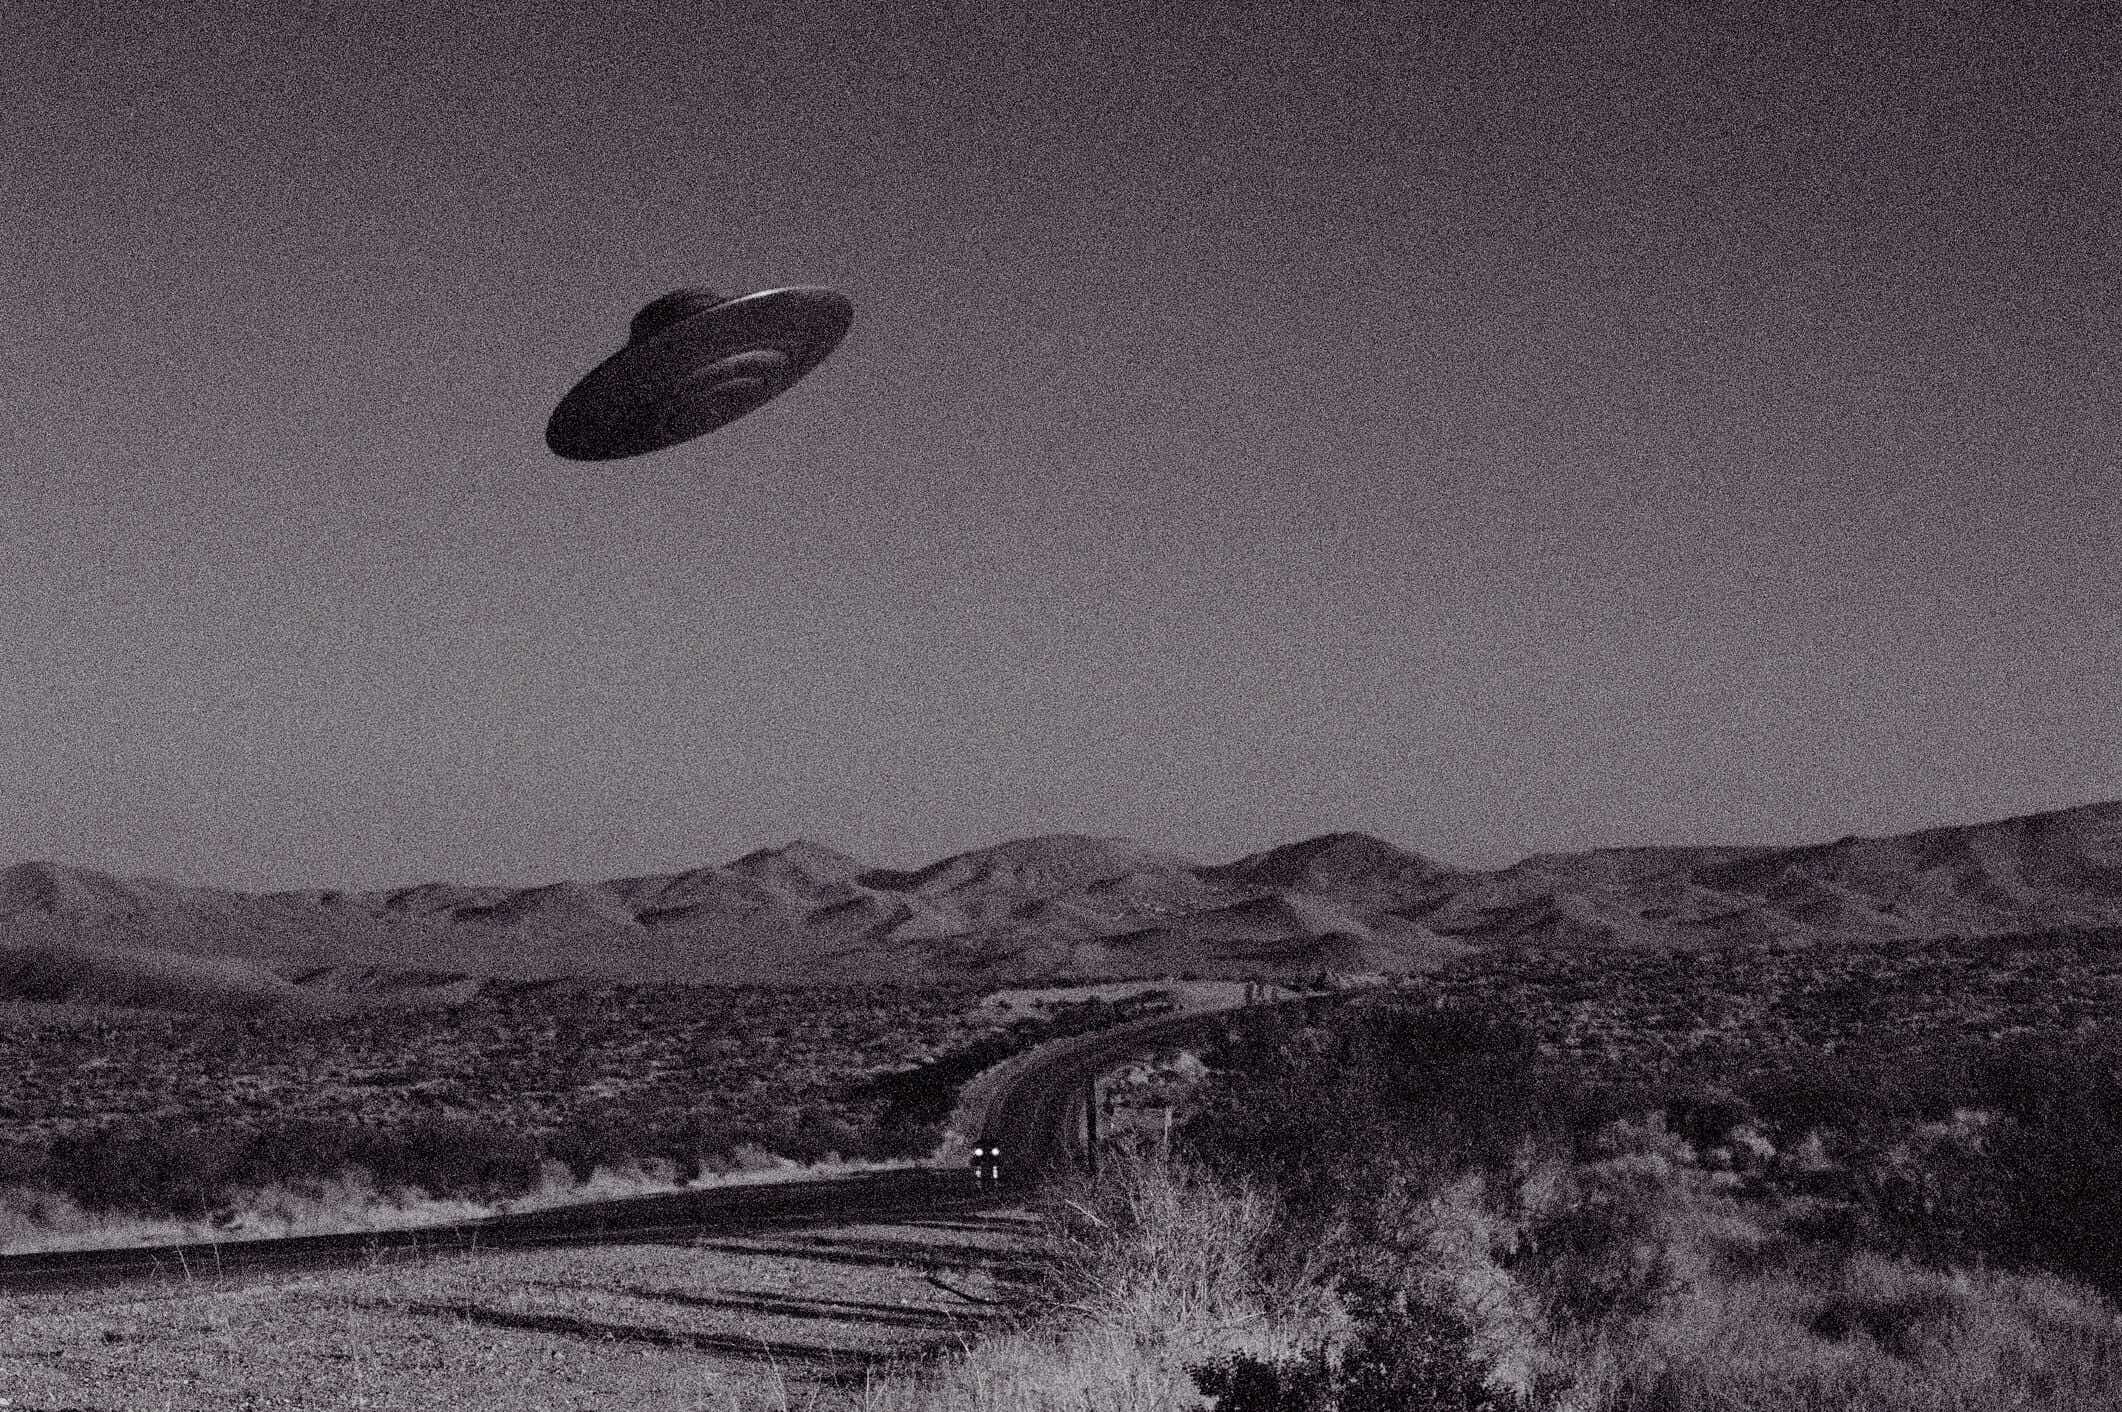 Image of a UFO over the desert, black and white